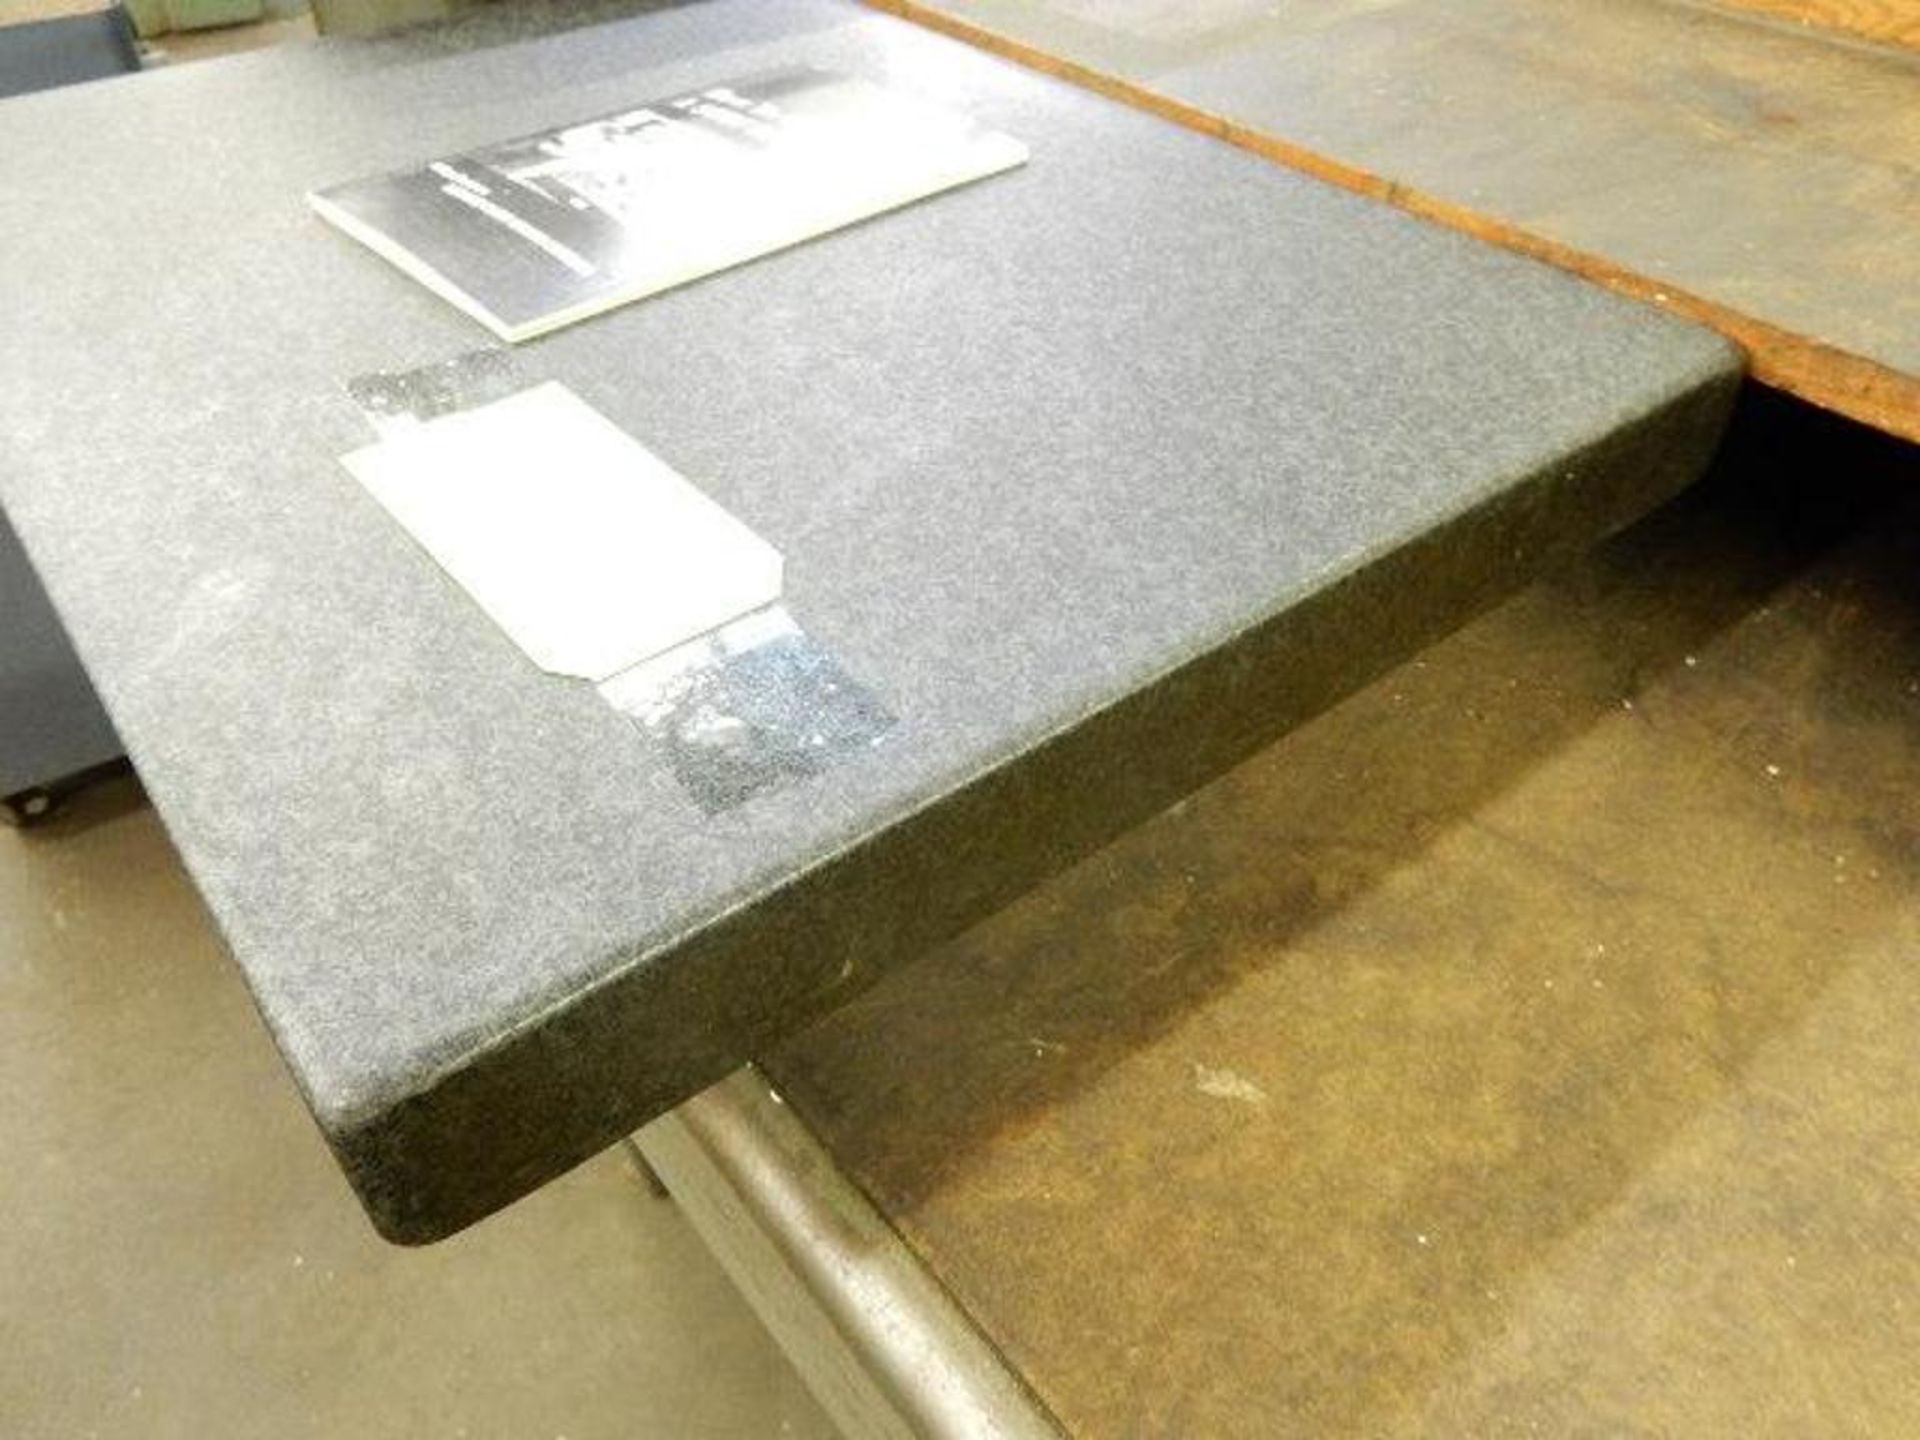 24" x 18" x 4" Double Ledge Granite Surface Plate - Image 3 of 3